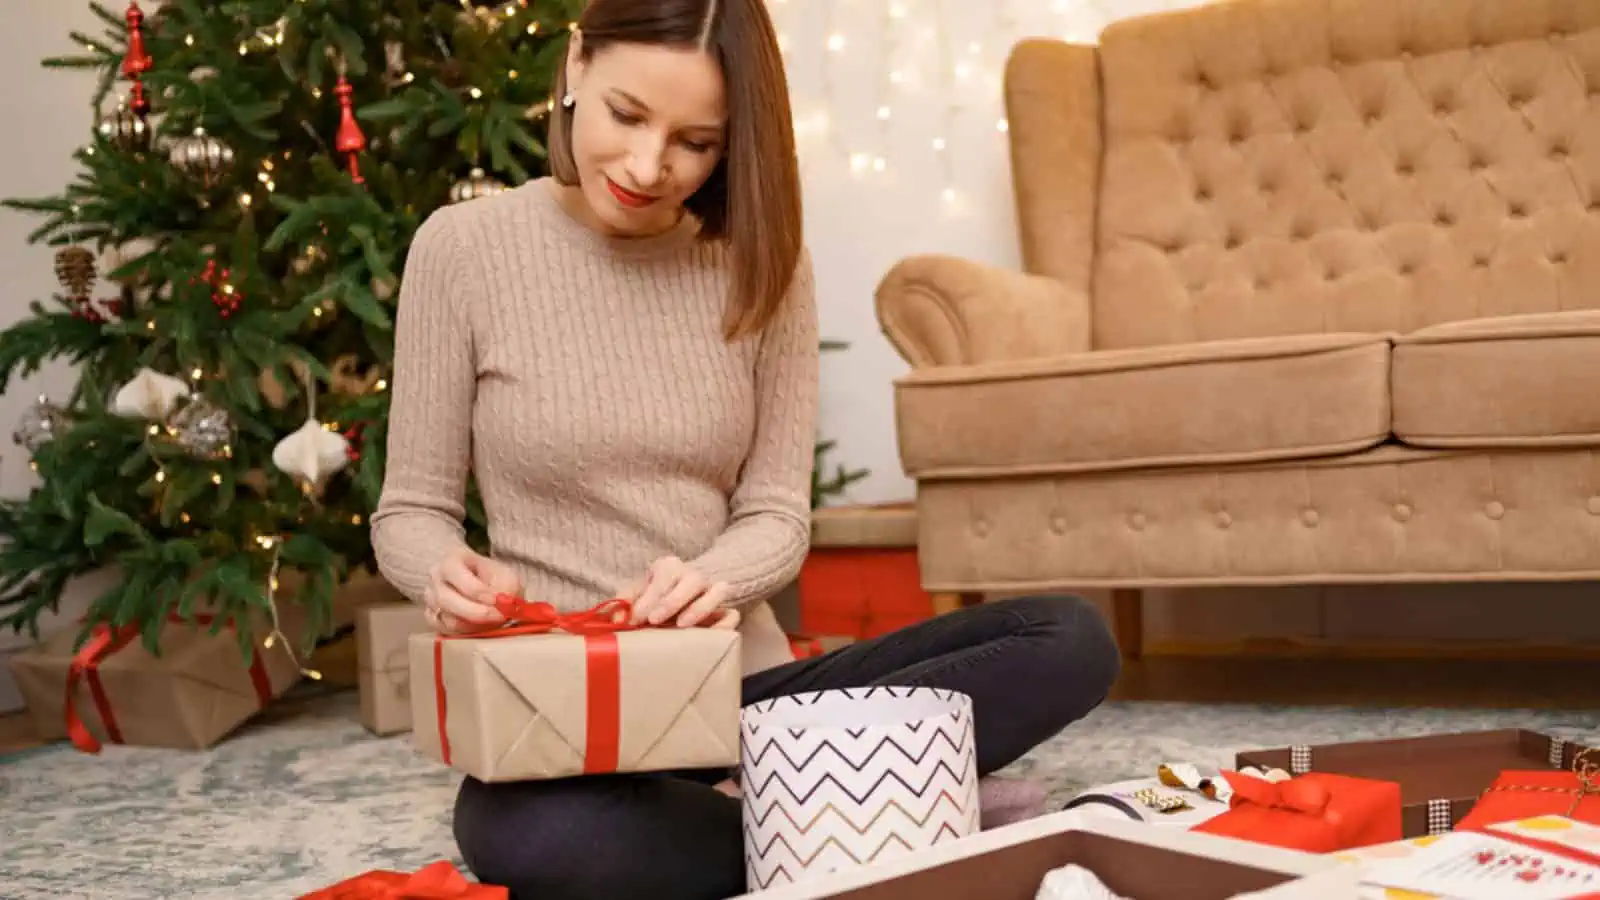 Woman wrapping Christmas gifts presents at home